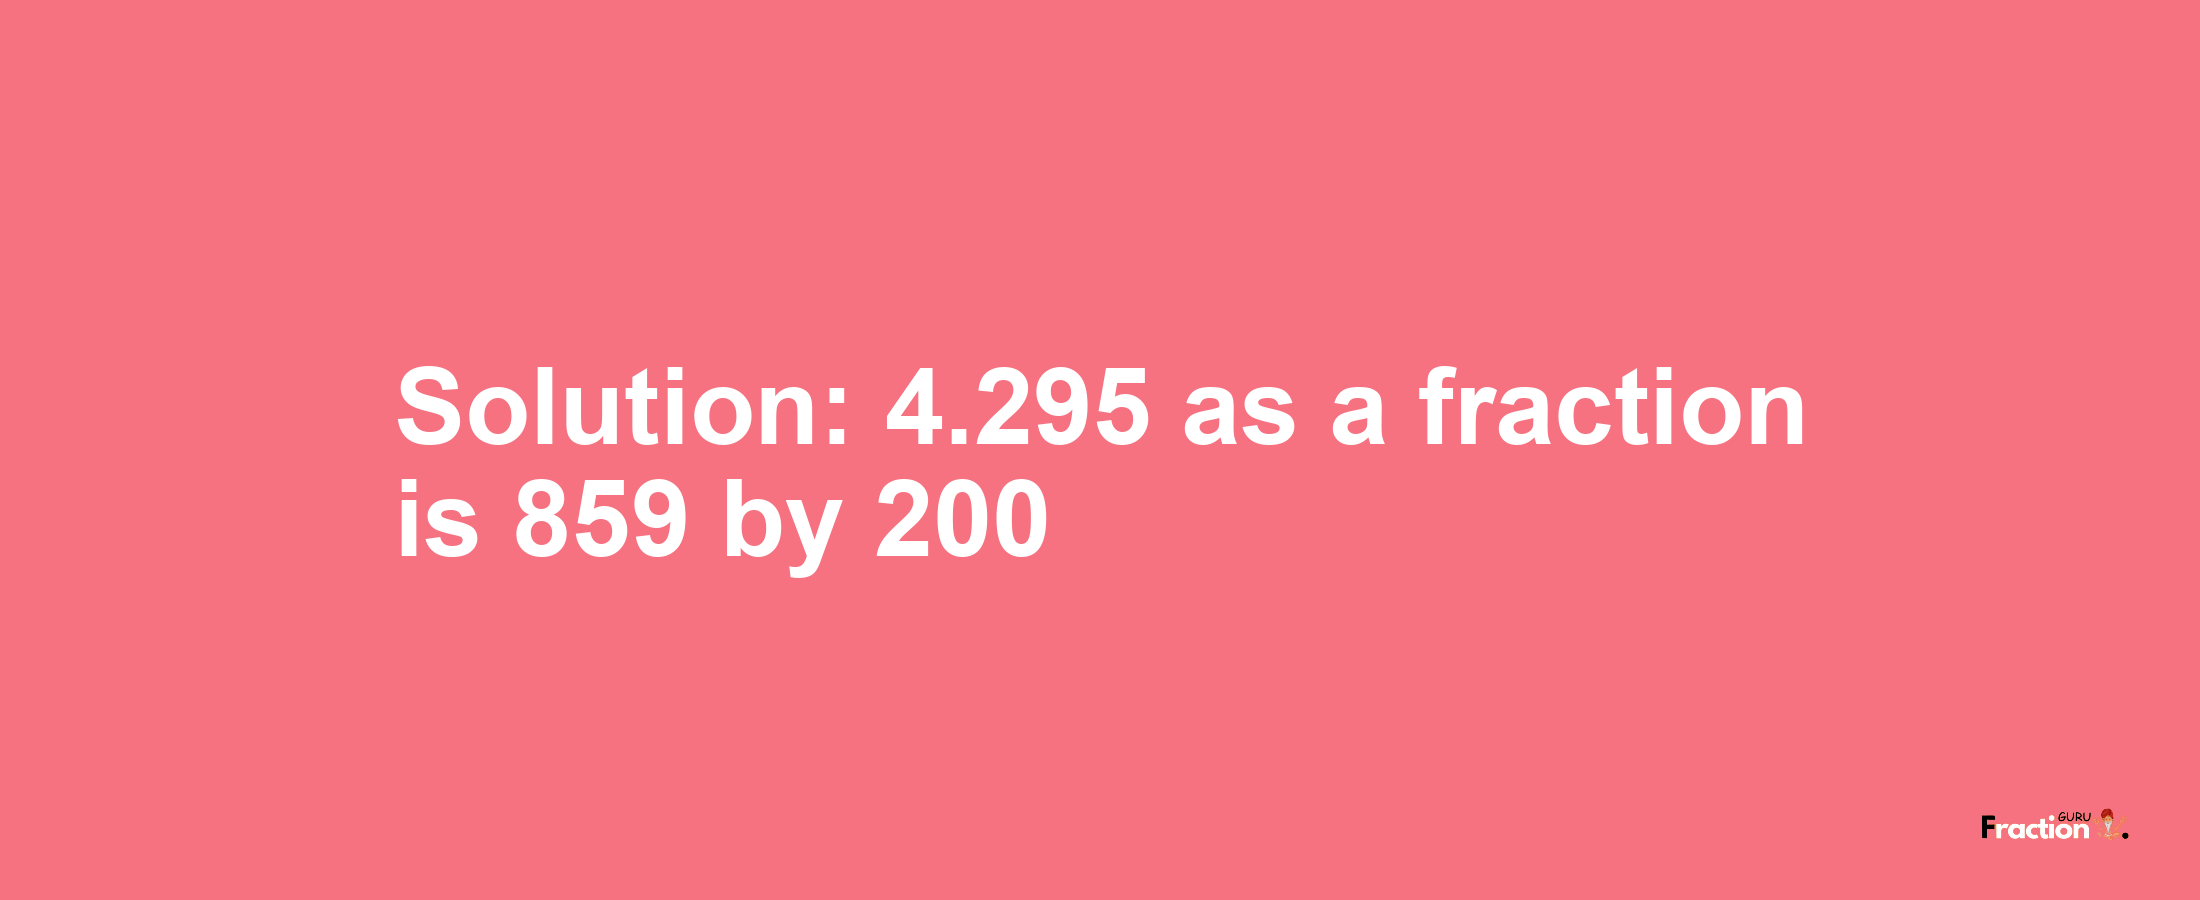 Solution:4.295 as a fraction is 859/200